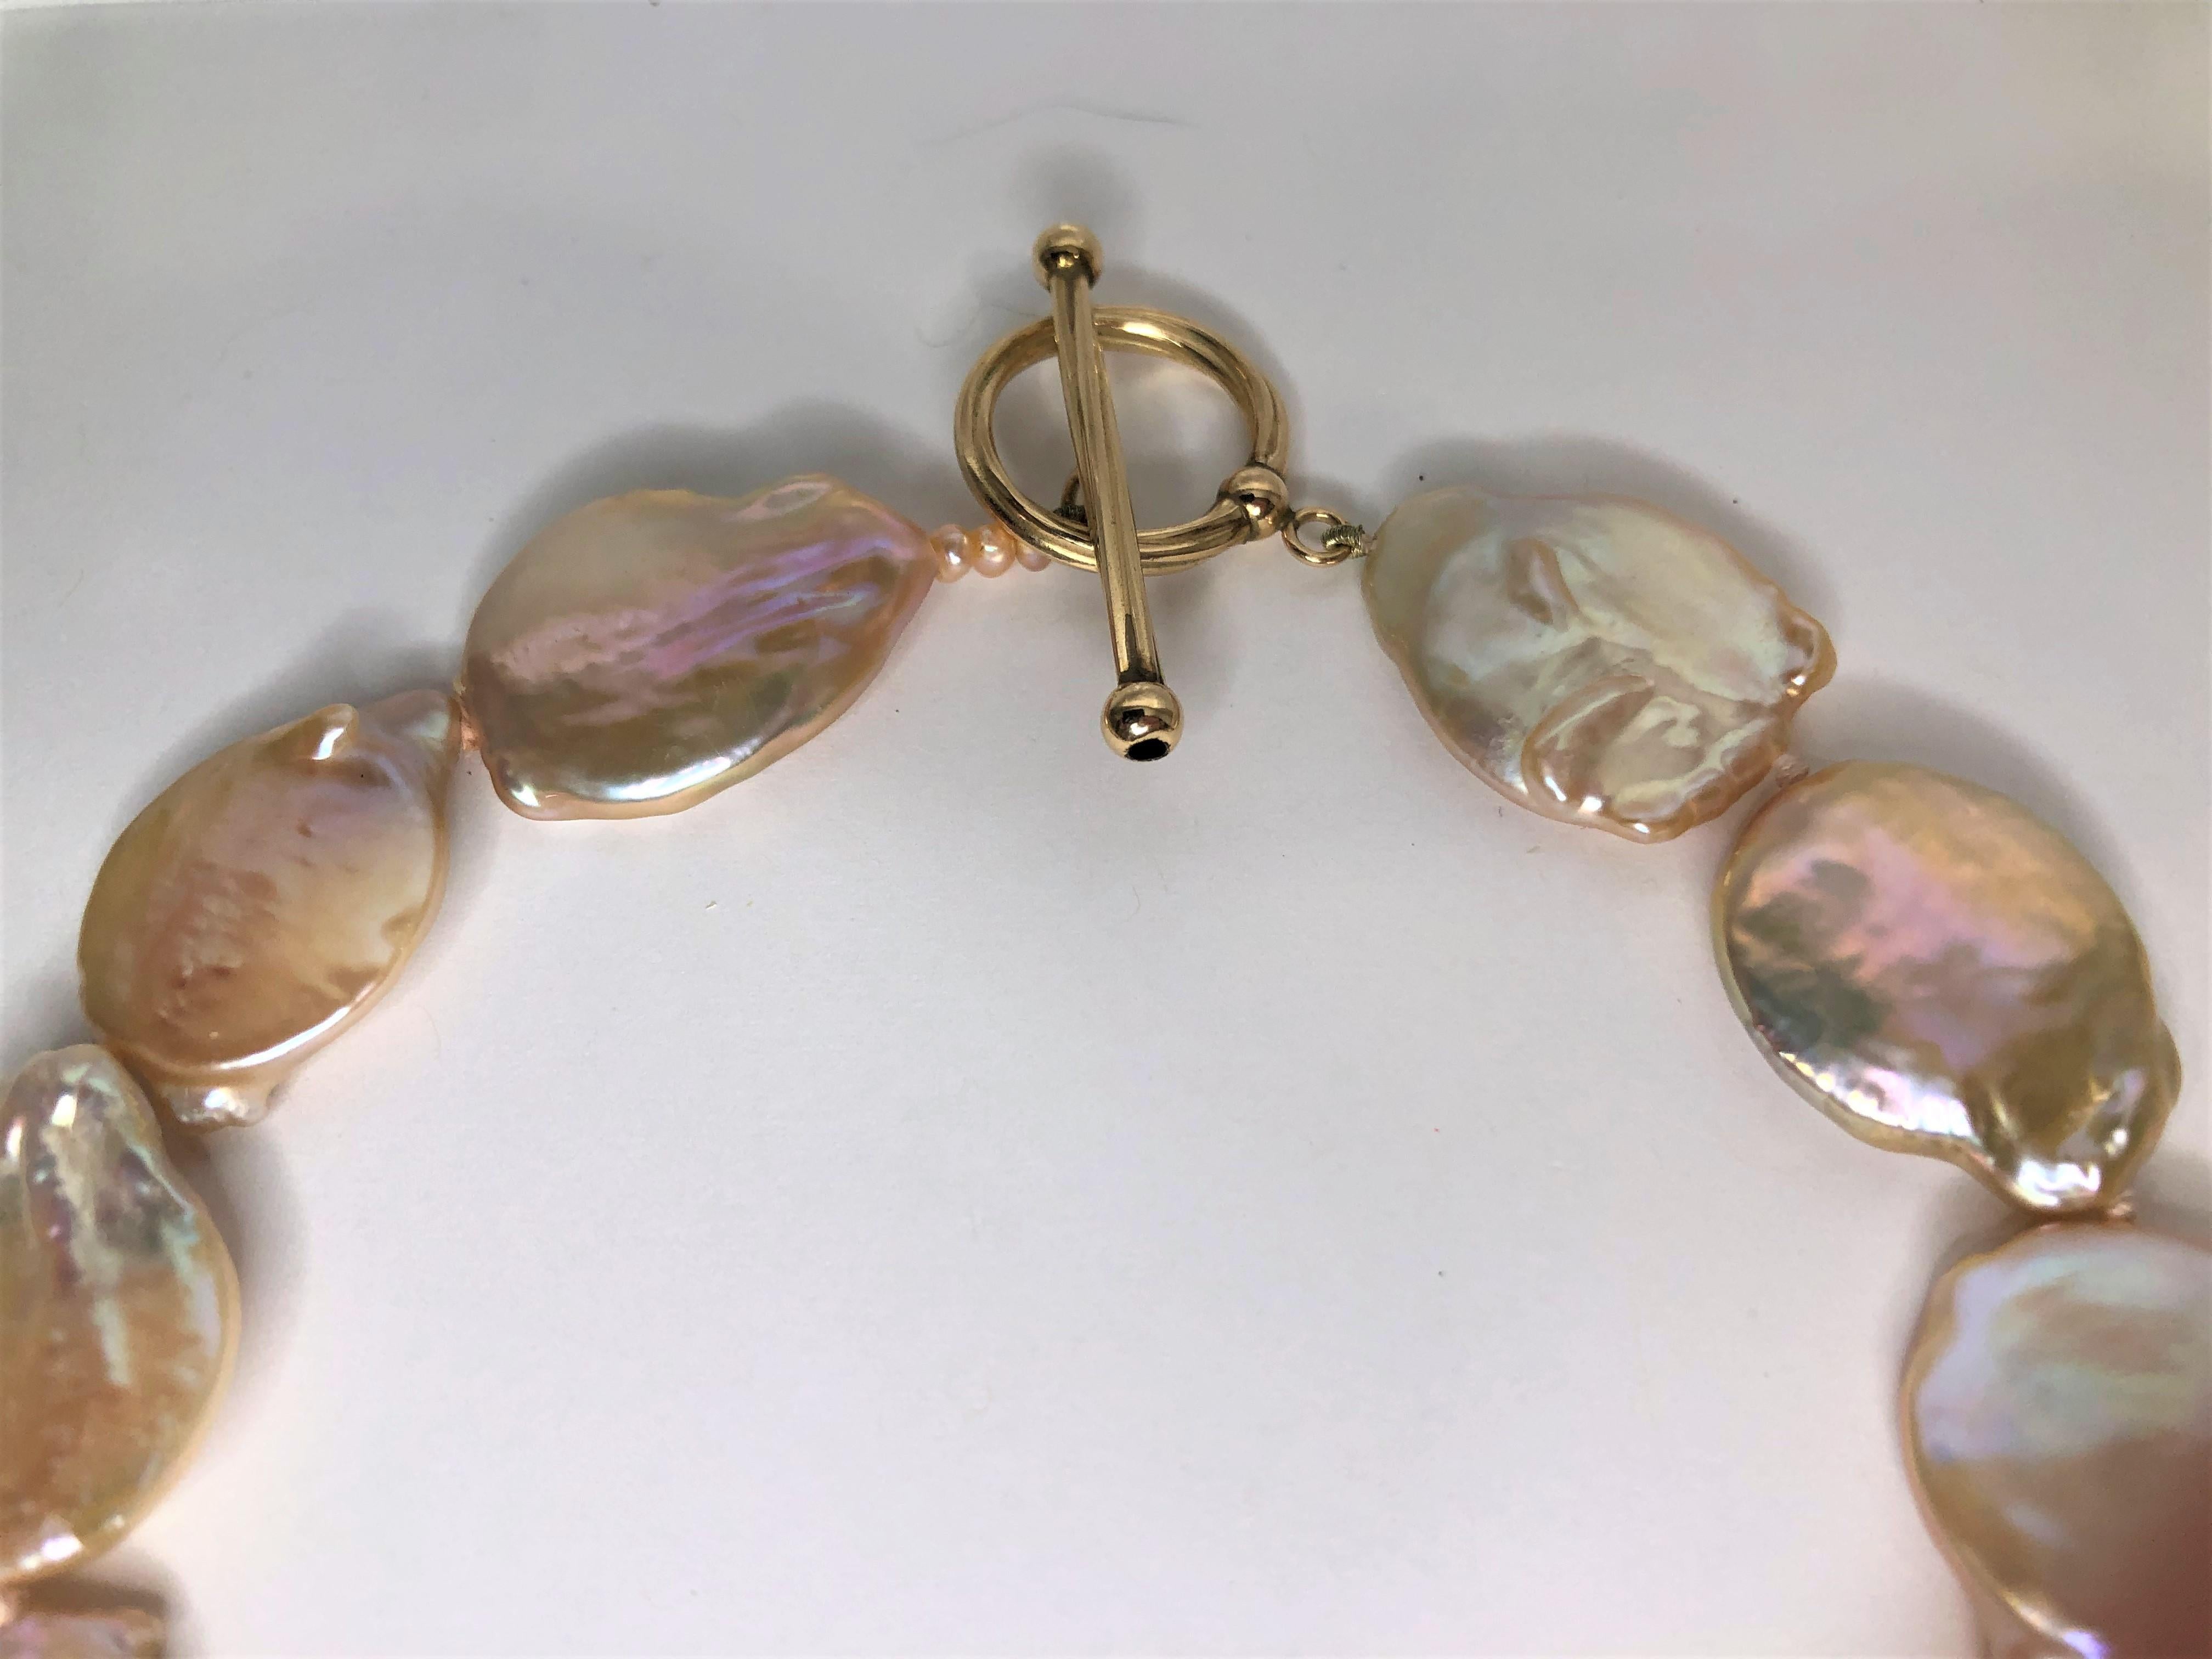 This beautiful pearl necklace is an easy to wear and is a  beautiful peach/pink color!
Large coin pearl knotted necklace with gold color toggle clasp. z
Toggle clasp has slightly twisted design.
18 shiny, baroque coin pearls varying in size and